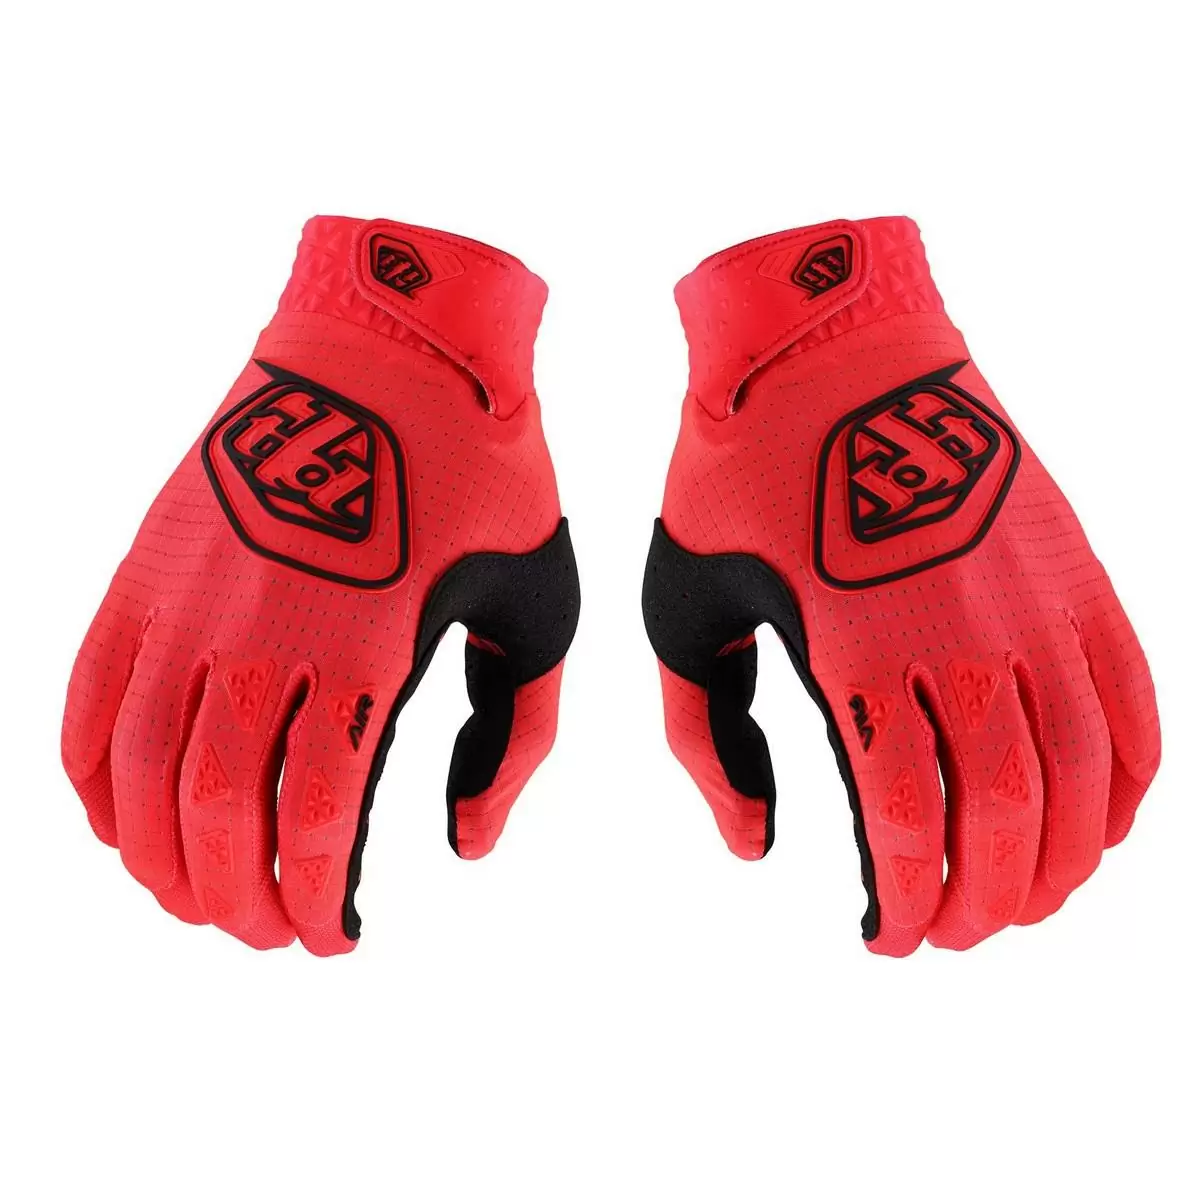 MTB Gloves Air Glove Red Fluo Size S - image